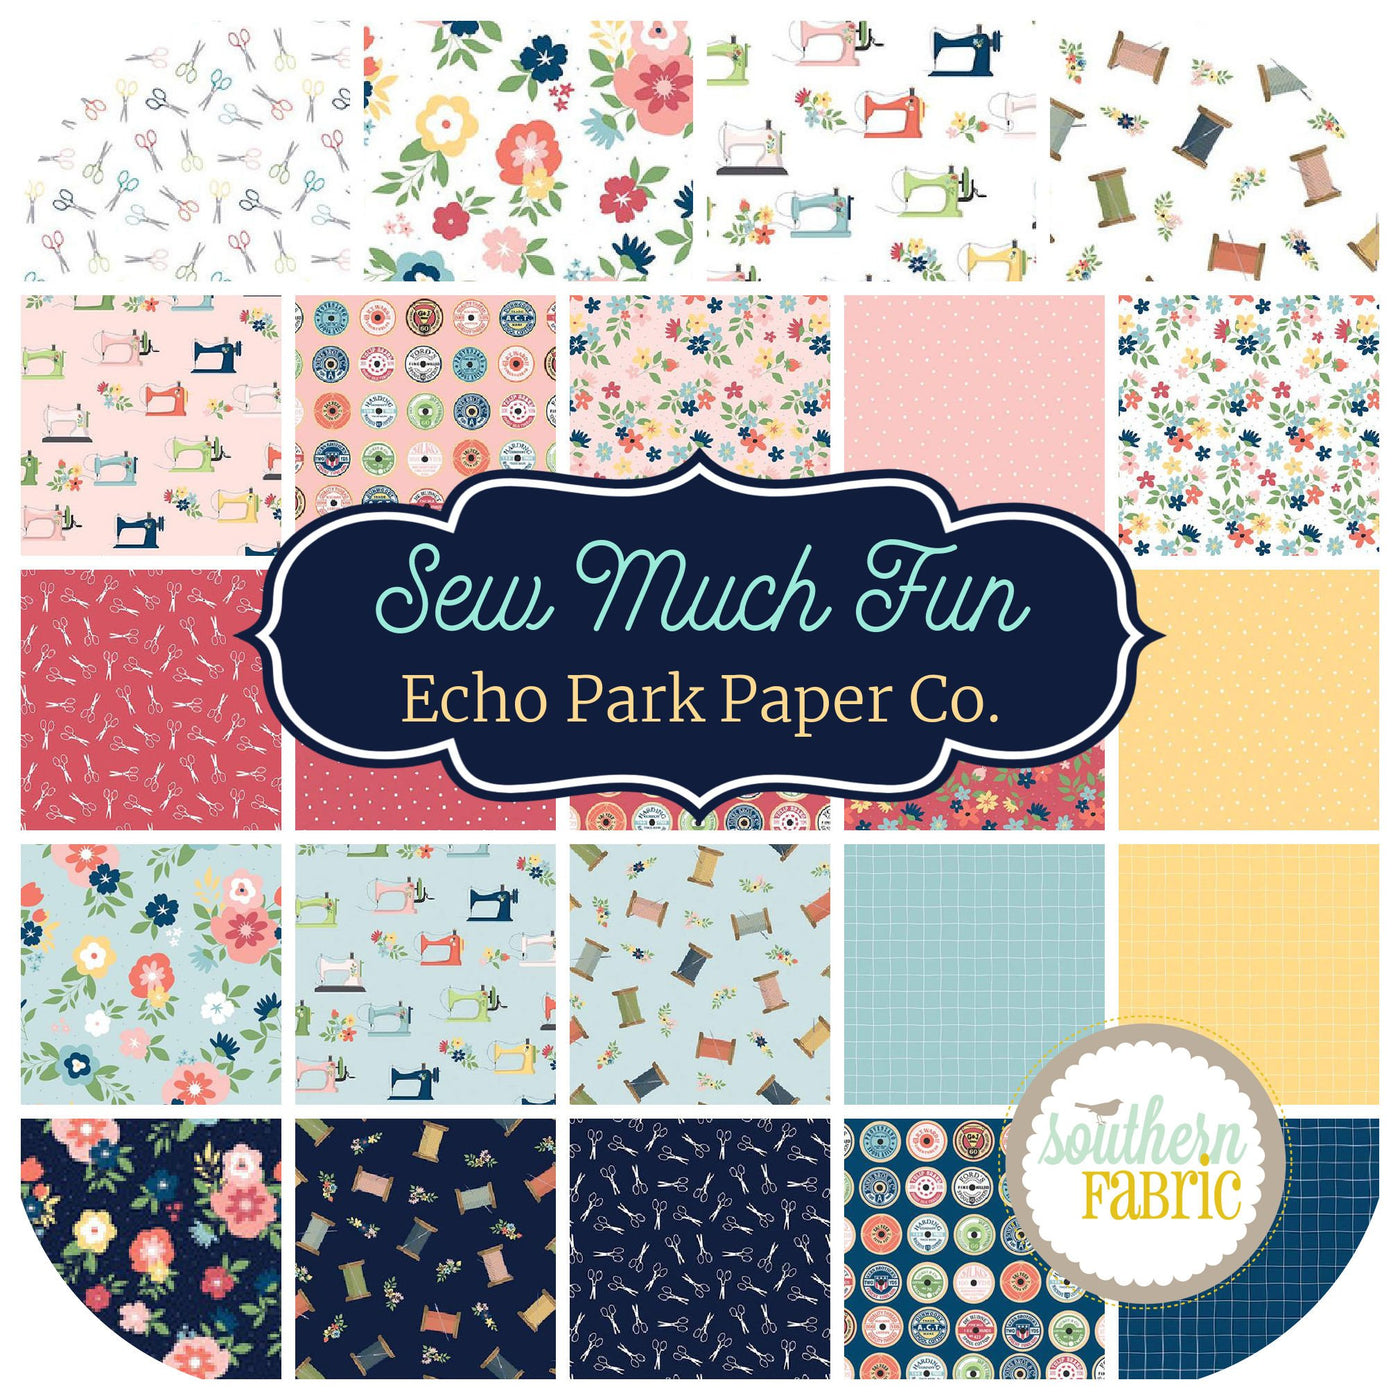 Sew Much Fun Jelly Roll (40 pcs) by Echo Park Paper Company for Riley Blake (RP-12450-40)